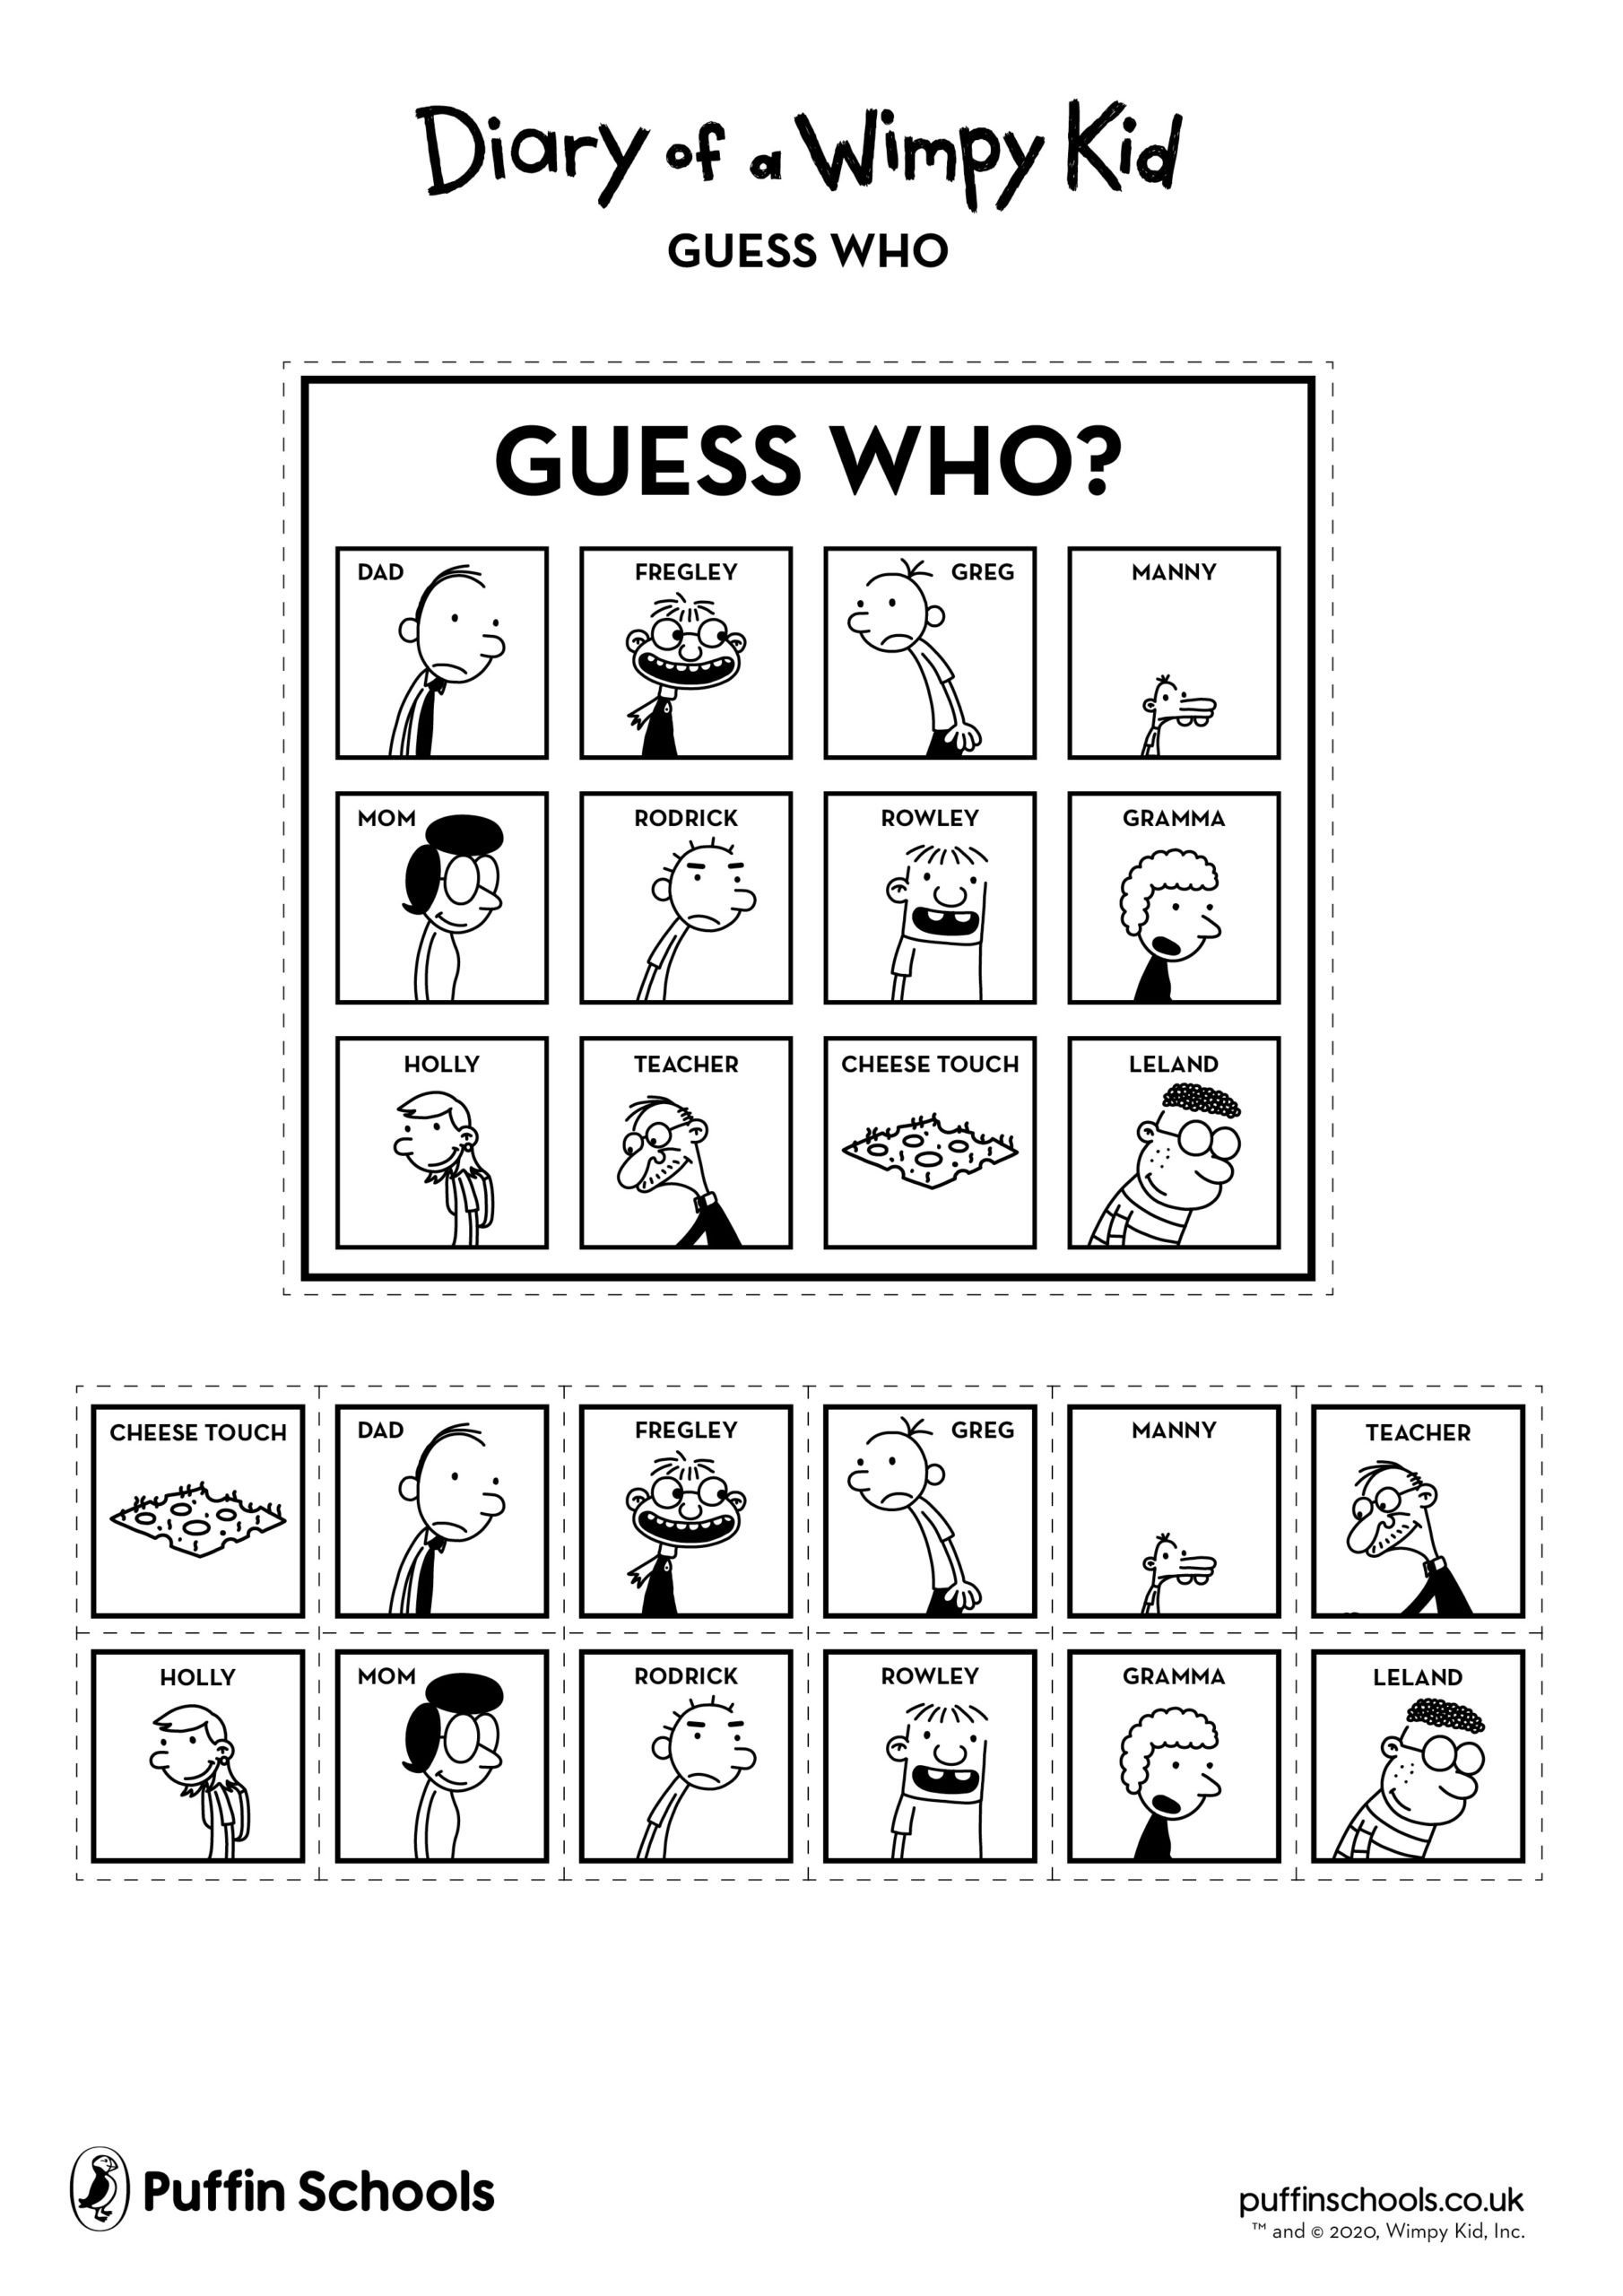 activity-ideas-wimpy-kid-guess-who-puffin-schools